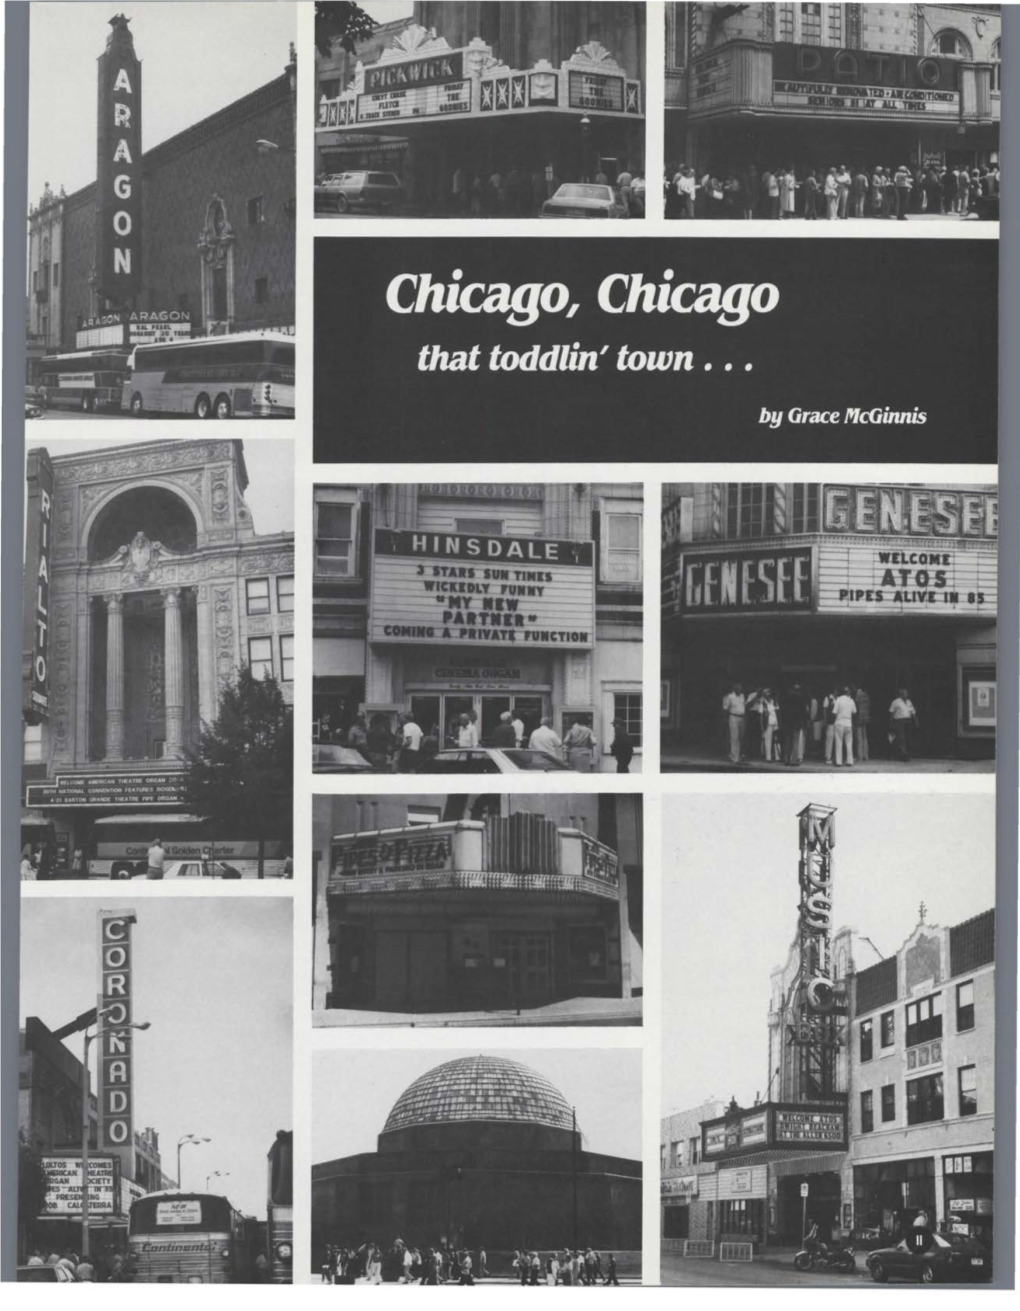 Chicago, Chicago, That Toddlin' Town" Chicago May Have ''Toddled'' When Fred Fisher Wrote Those Lyrics in 1922, but for 840 Atosers It Certainly Didn't in 1985